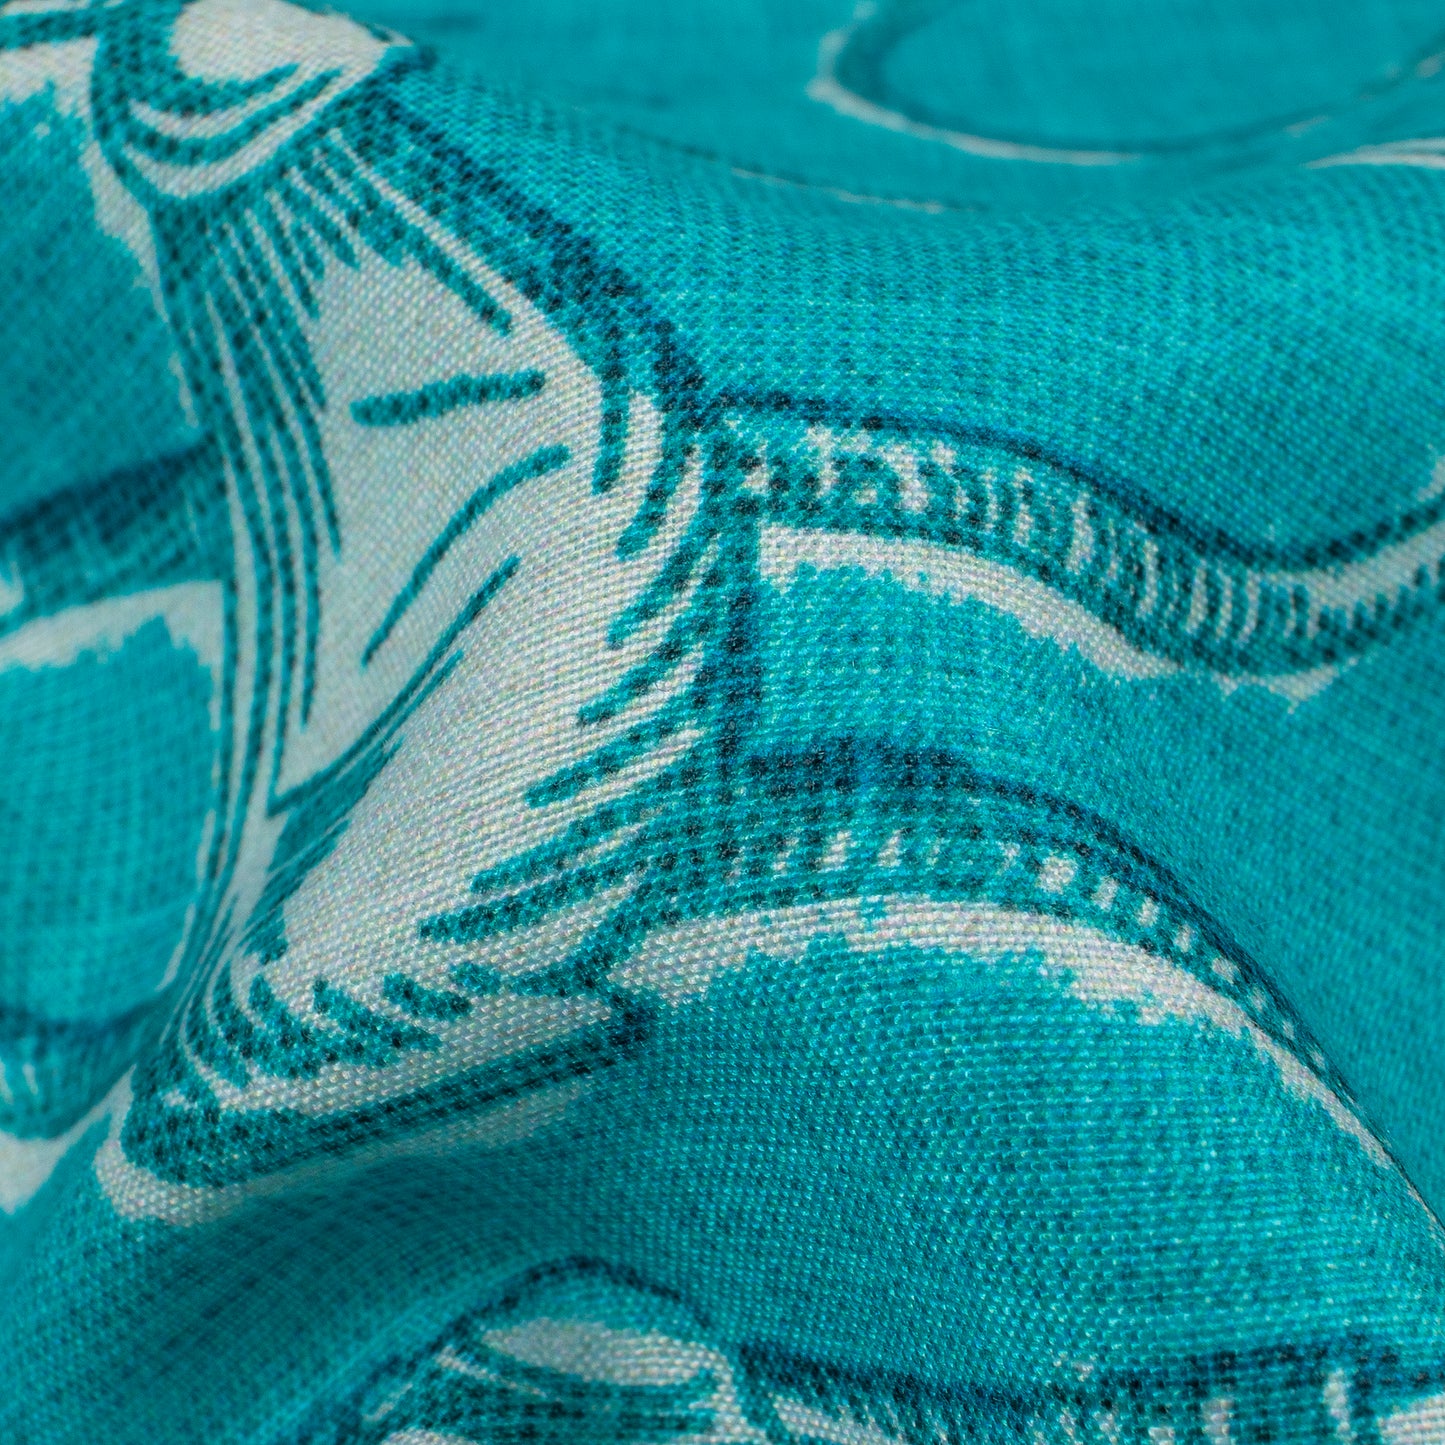 Dark Turquoise And White Quirky Pattern Digital Print Muslin Fabric